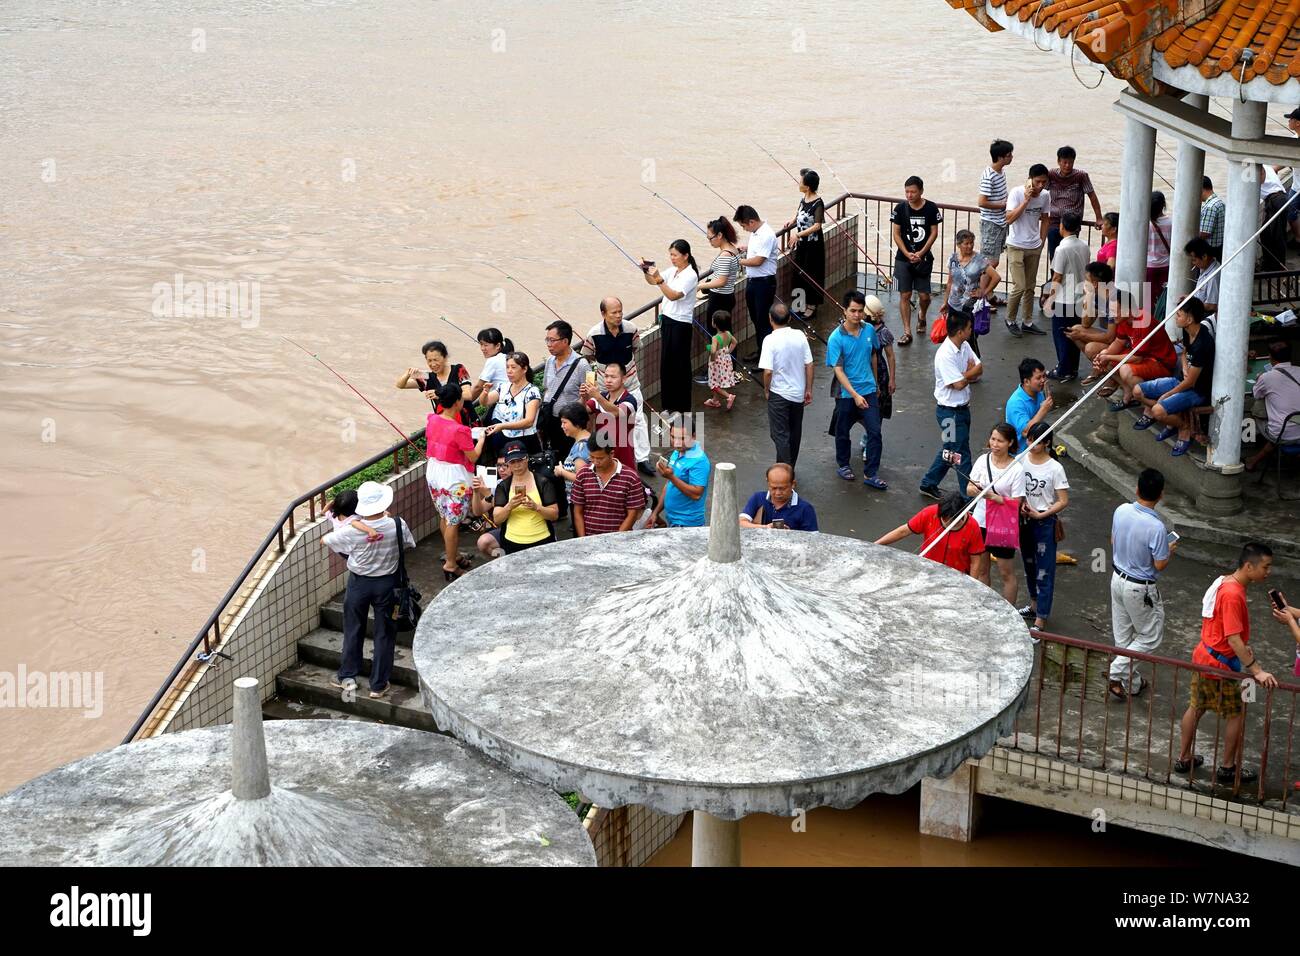 Local residents visit the bank of the flooded Xijiang River caused by heavy rains in Wuzhou city, south China's Guangxi Zhuang Autonomous Region, 4 Ju Stock Photo